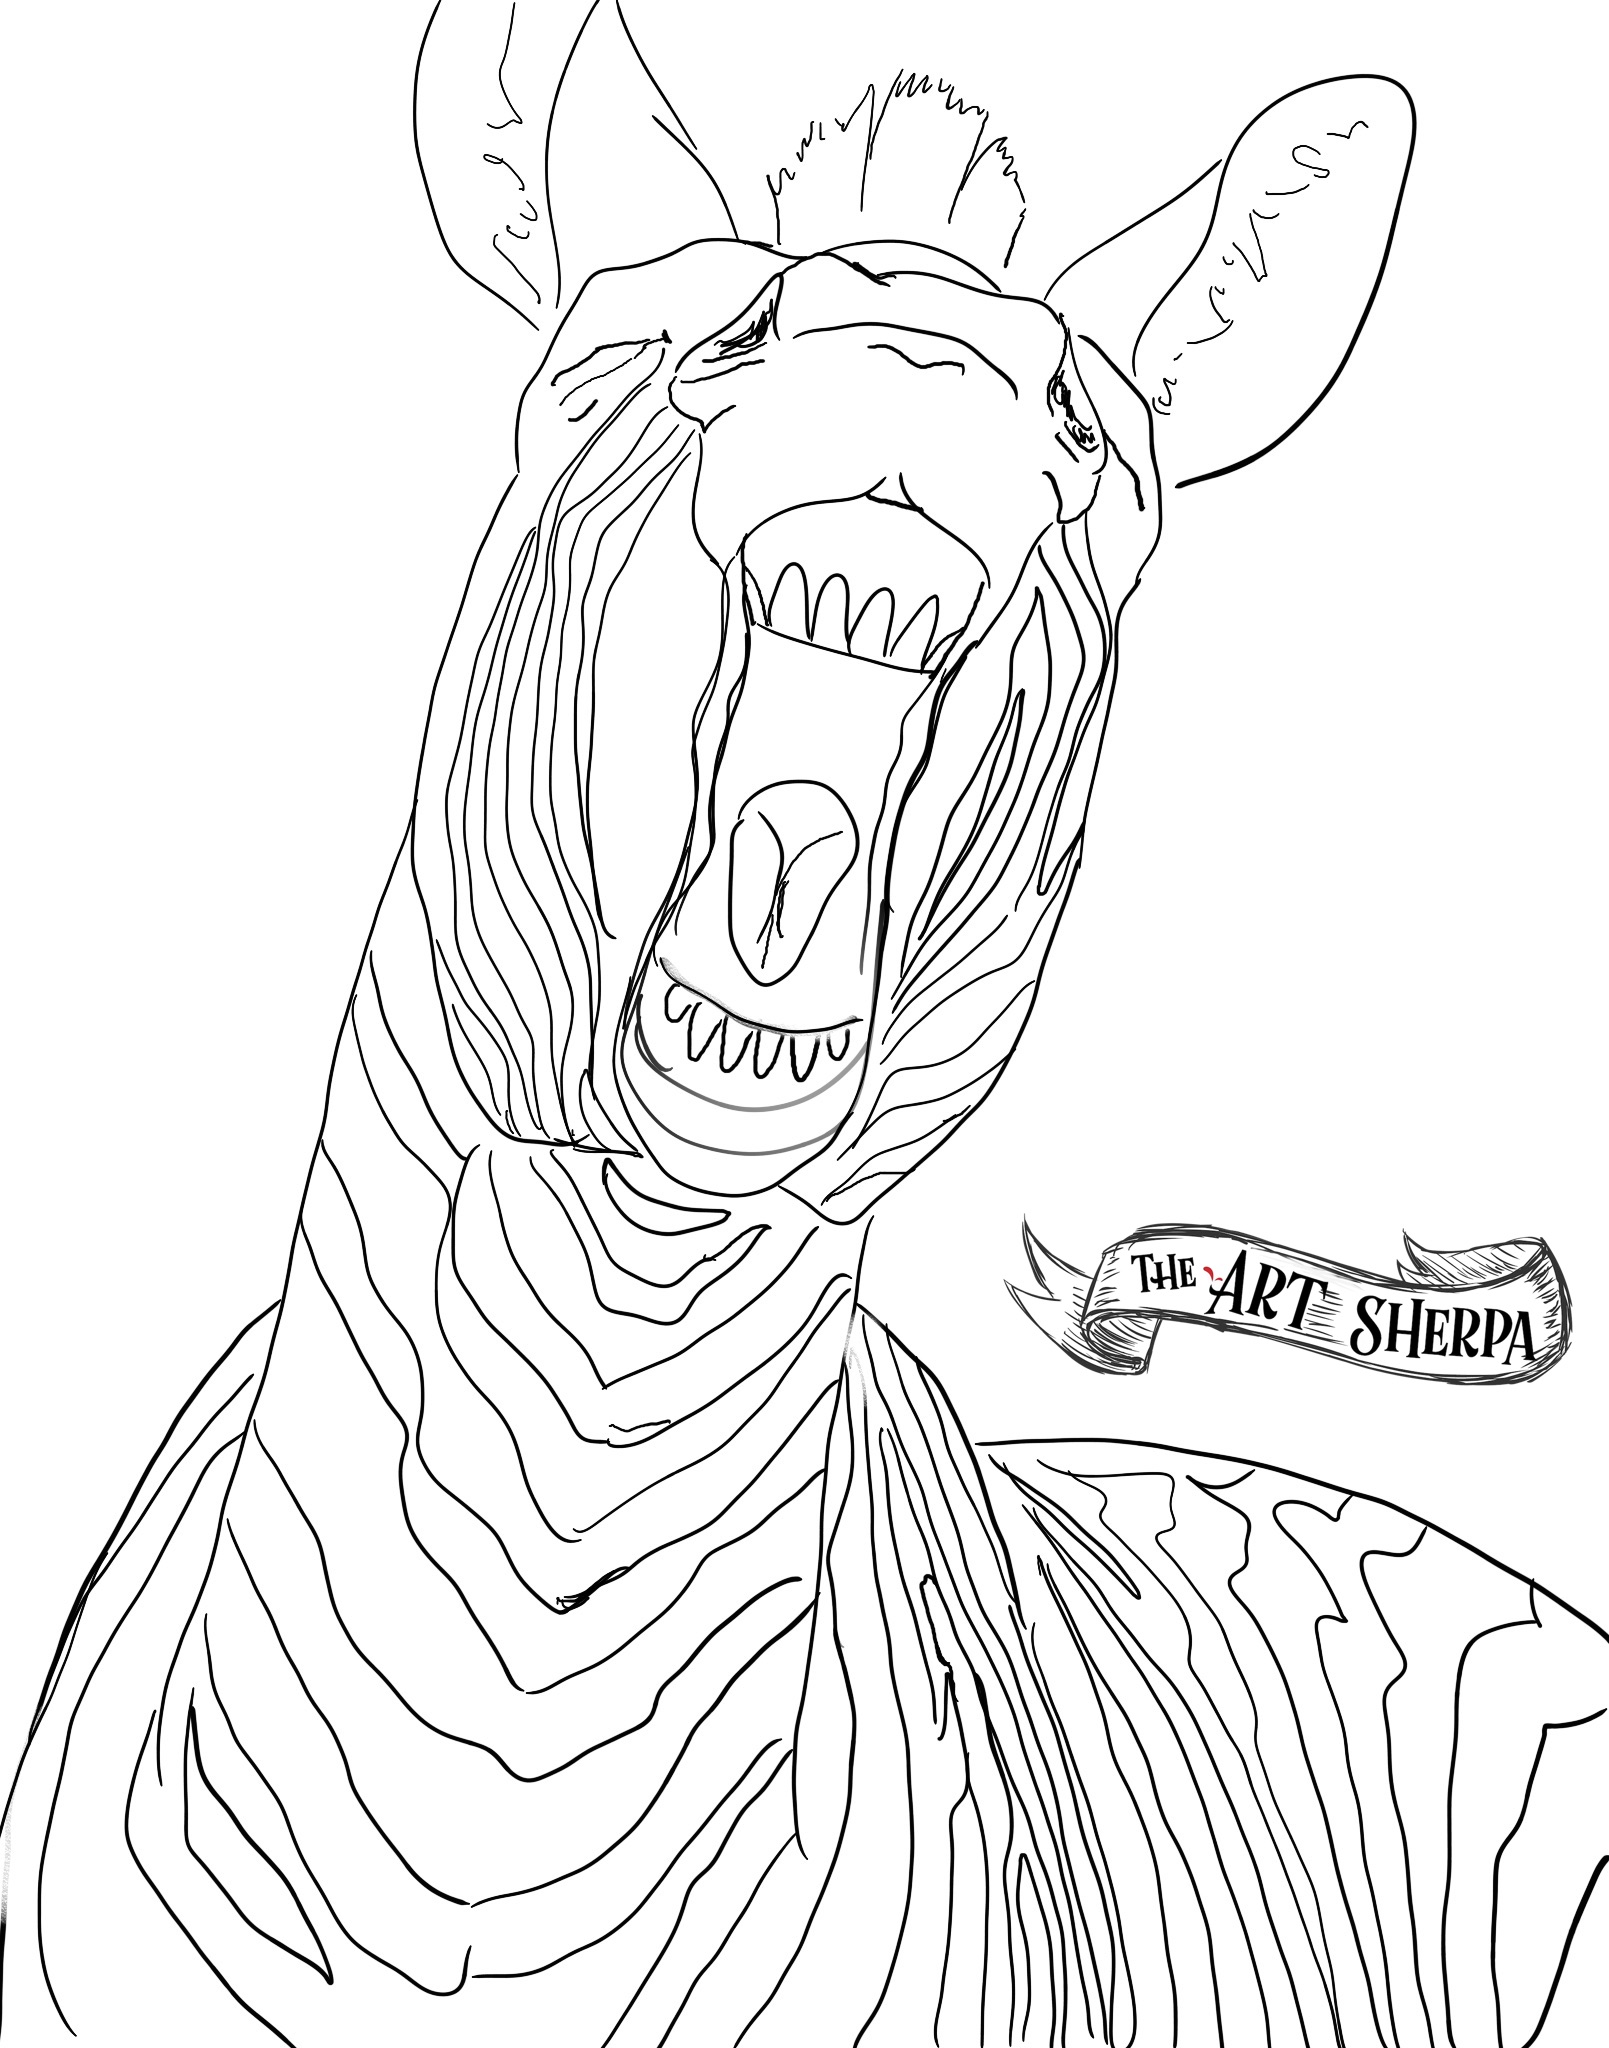 Easy How to Draw a Zebra Tutorial and Zebra Coloring Page